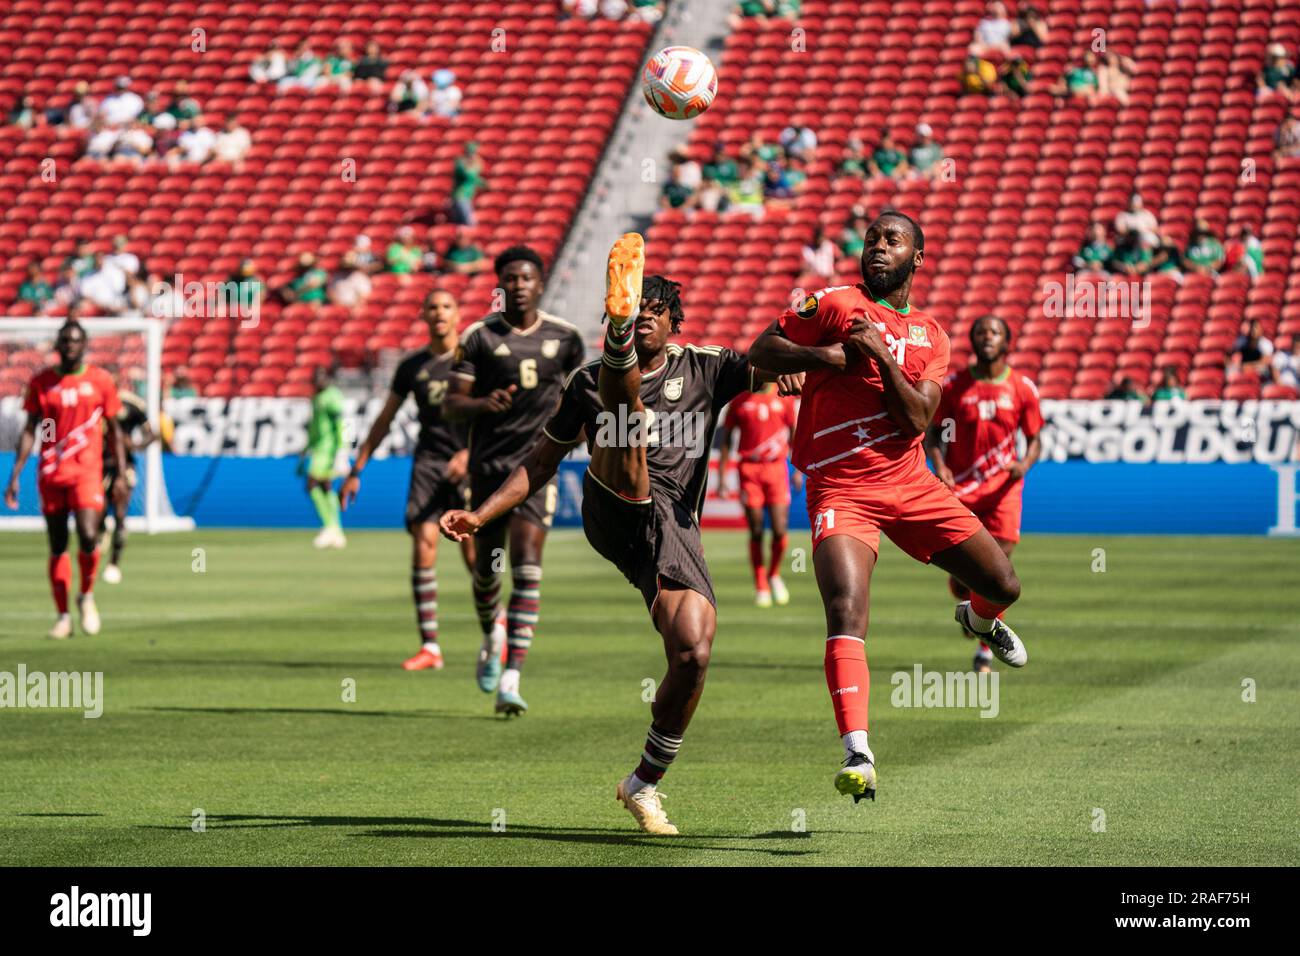 Jamaica defender Dexter Lembikisa (2) clears the ball against Saint Kitts and Nevis forward Omari Sterling-James (21) during a Gold Cup match, Sunday, Stock Photo